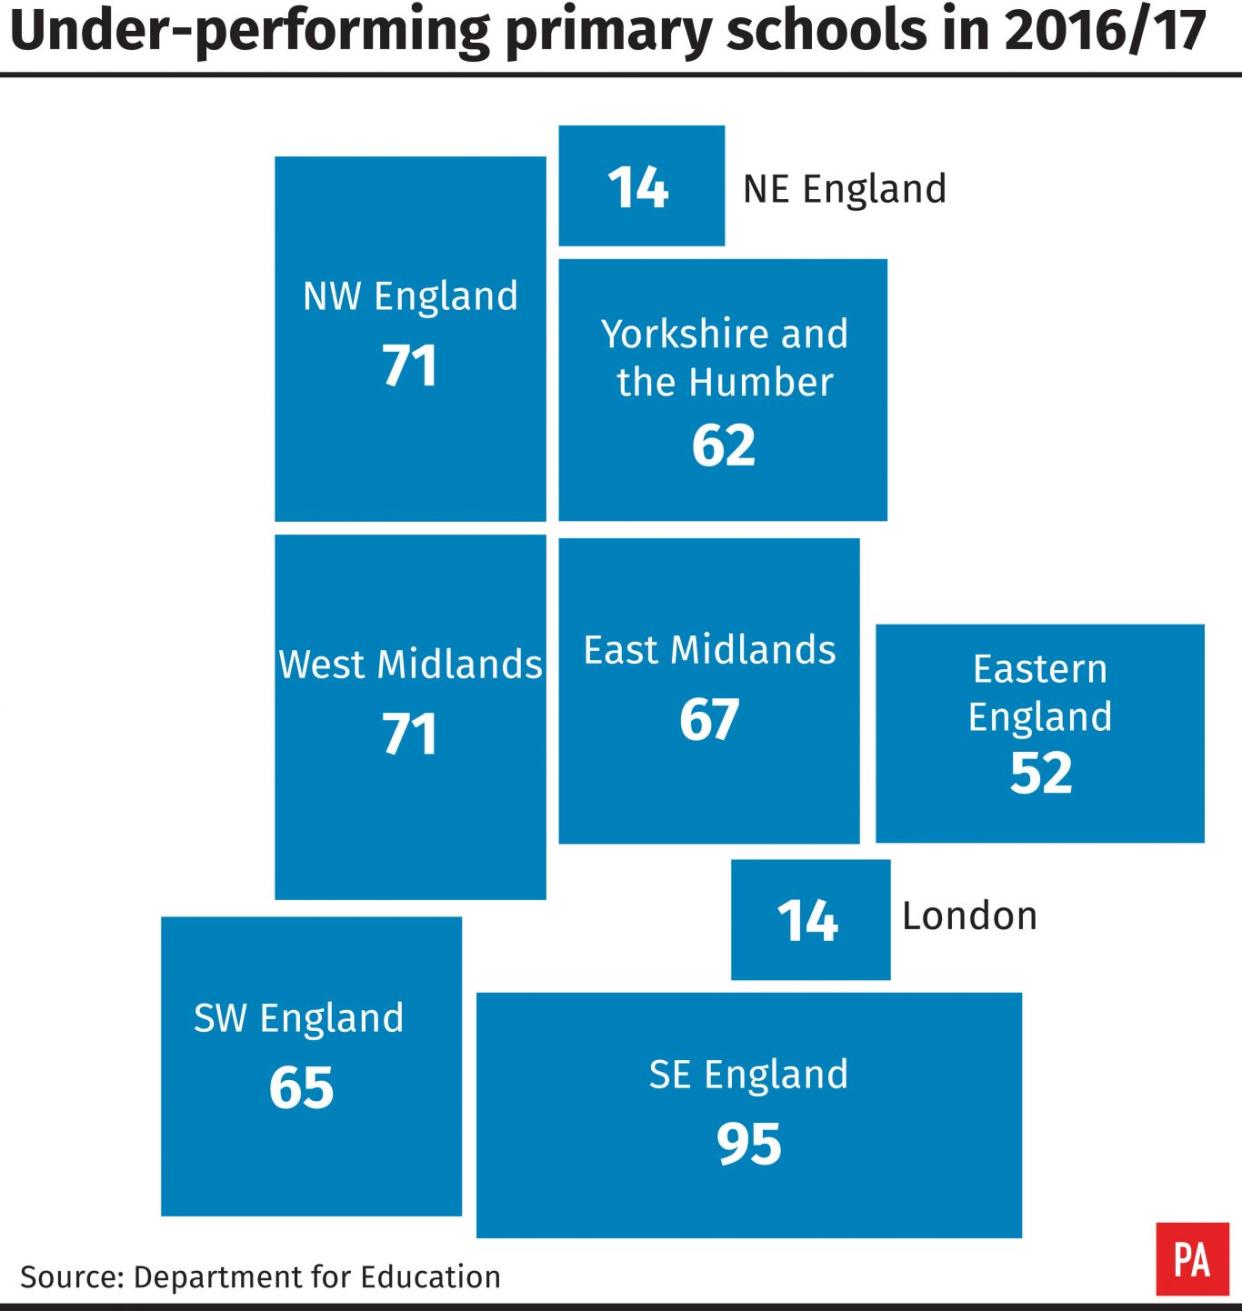 Under-performing primary schools in 2016/17 by English region